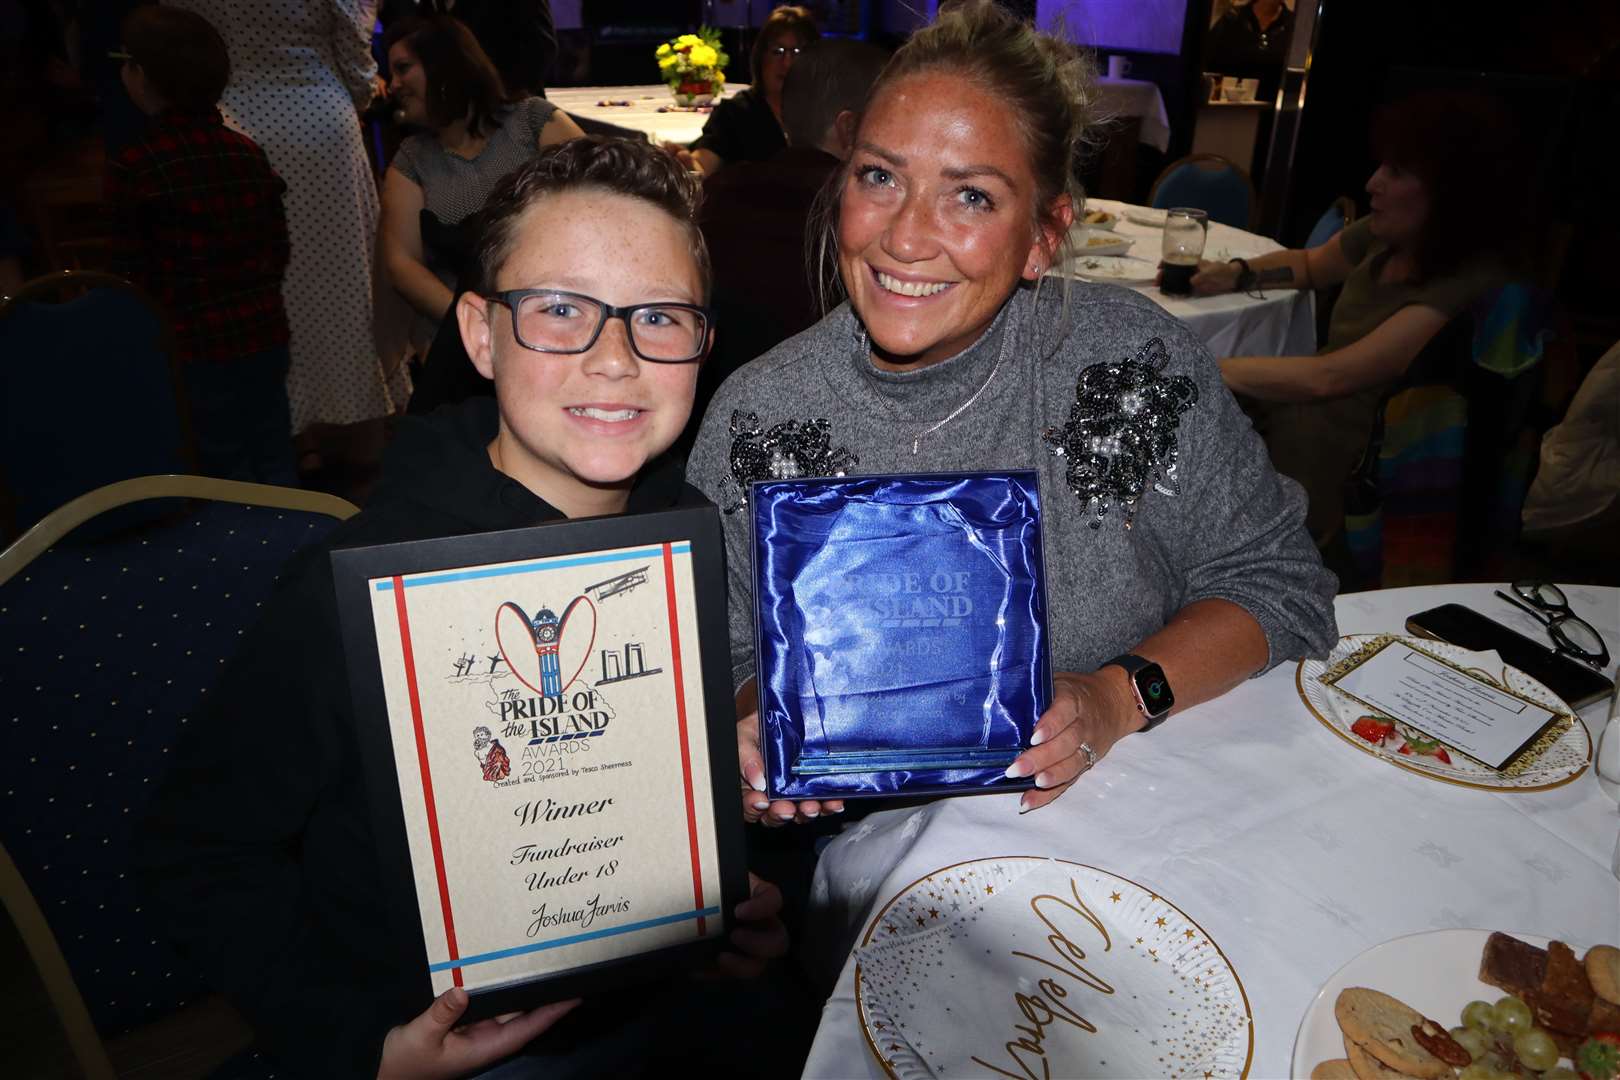 Joshua Jarvis, 11, pictured with his mum Lorraine, was named under-18 fundraiser with Harvey Servant in the Tesco Pride of the Island awards